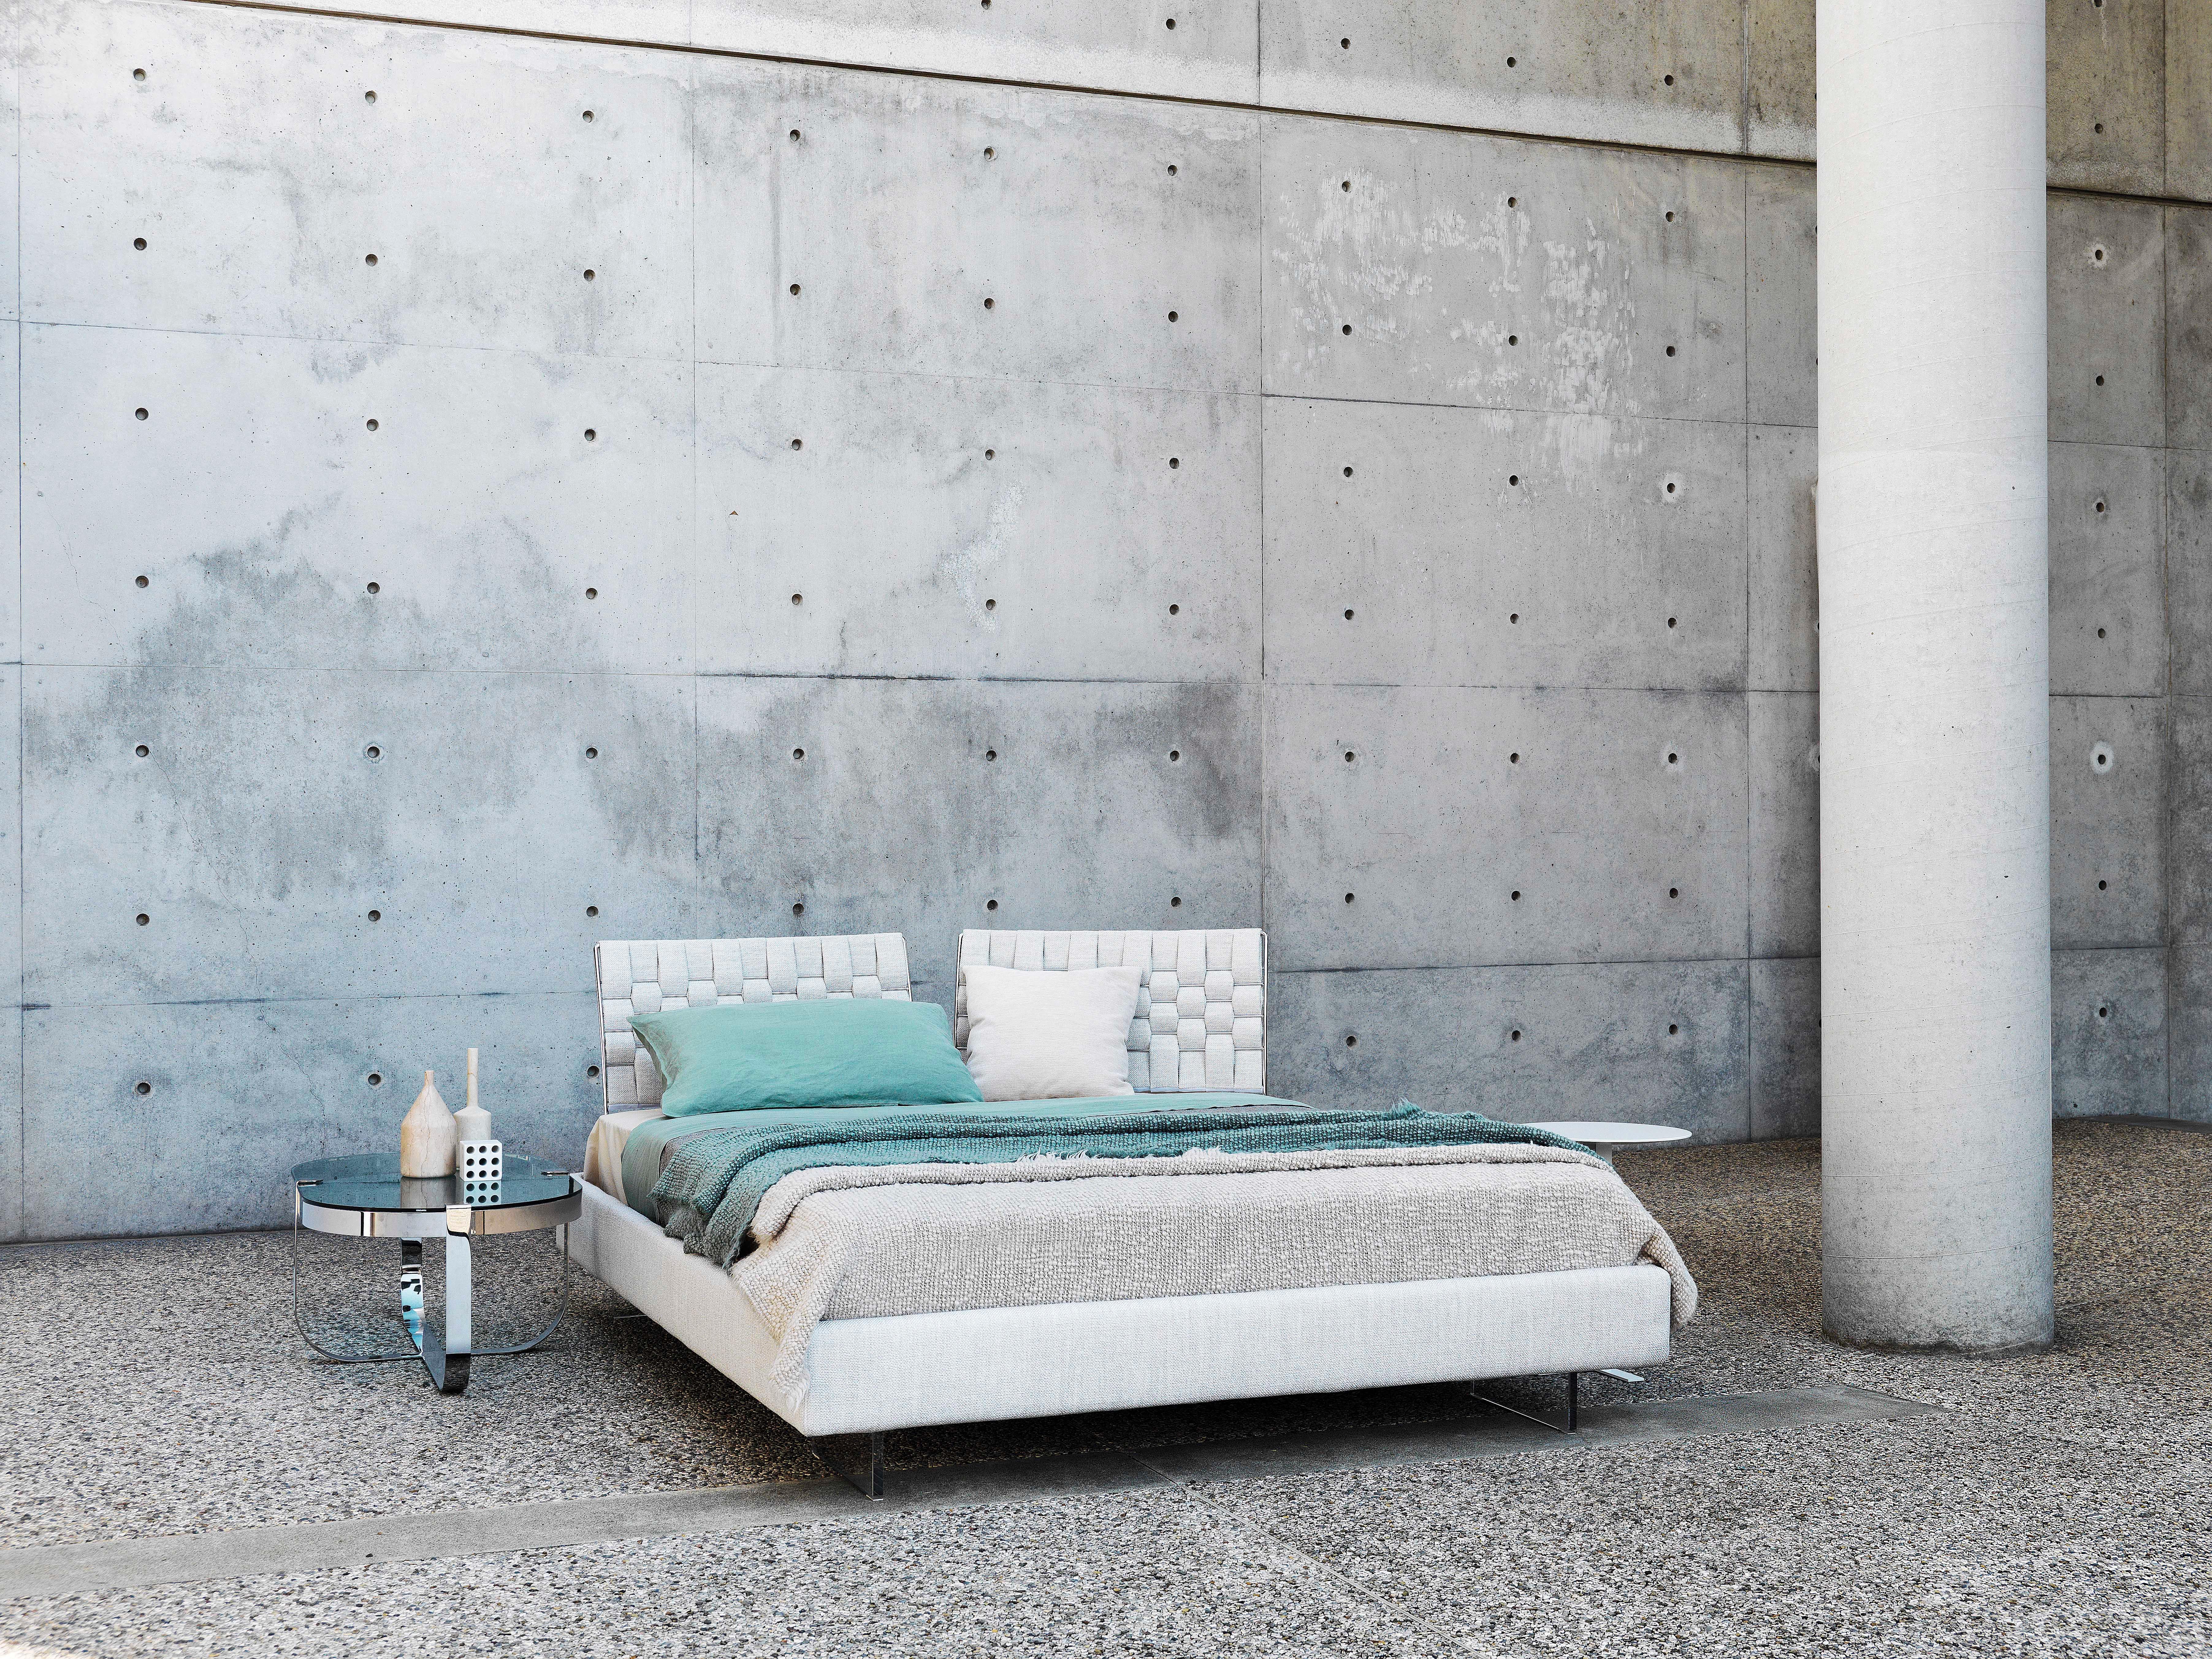 Limes T Large follows the same stylistic line of the Limes collection and is characterized by a functional integrated padded shelf, which depending on the panels positioning, can add an extra area to the headboard or footboard.

Born in 1953 he